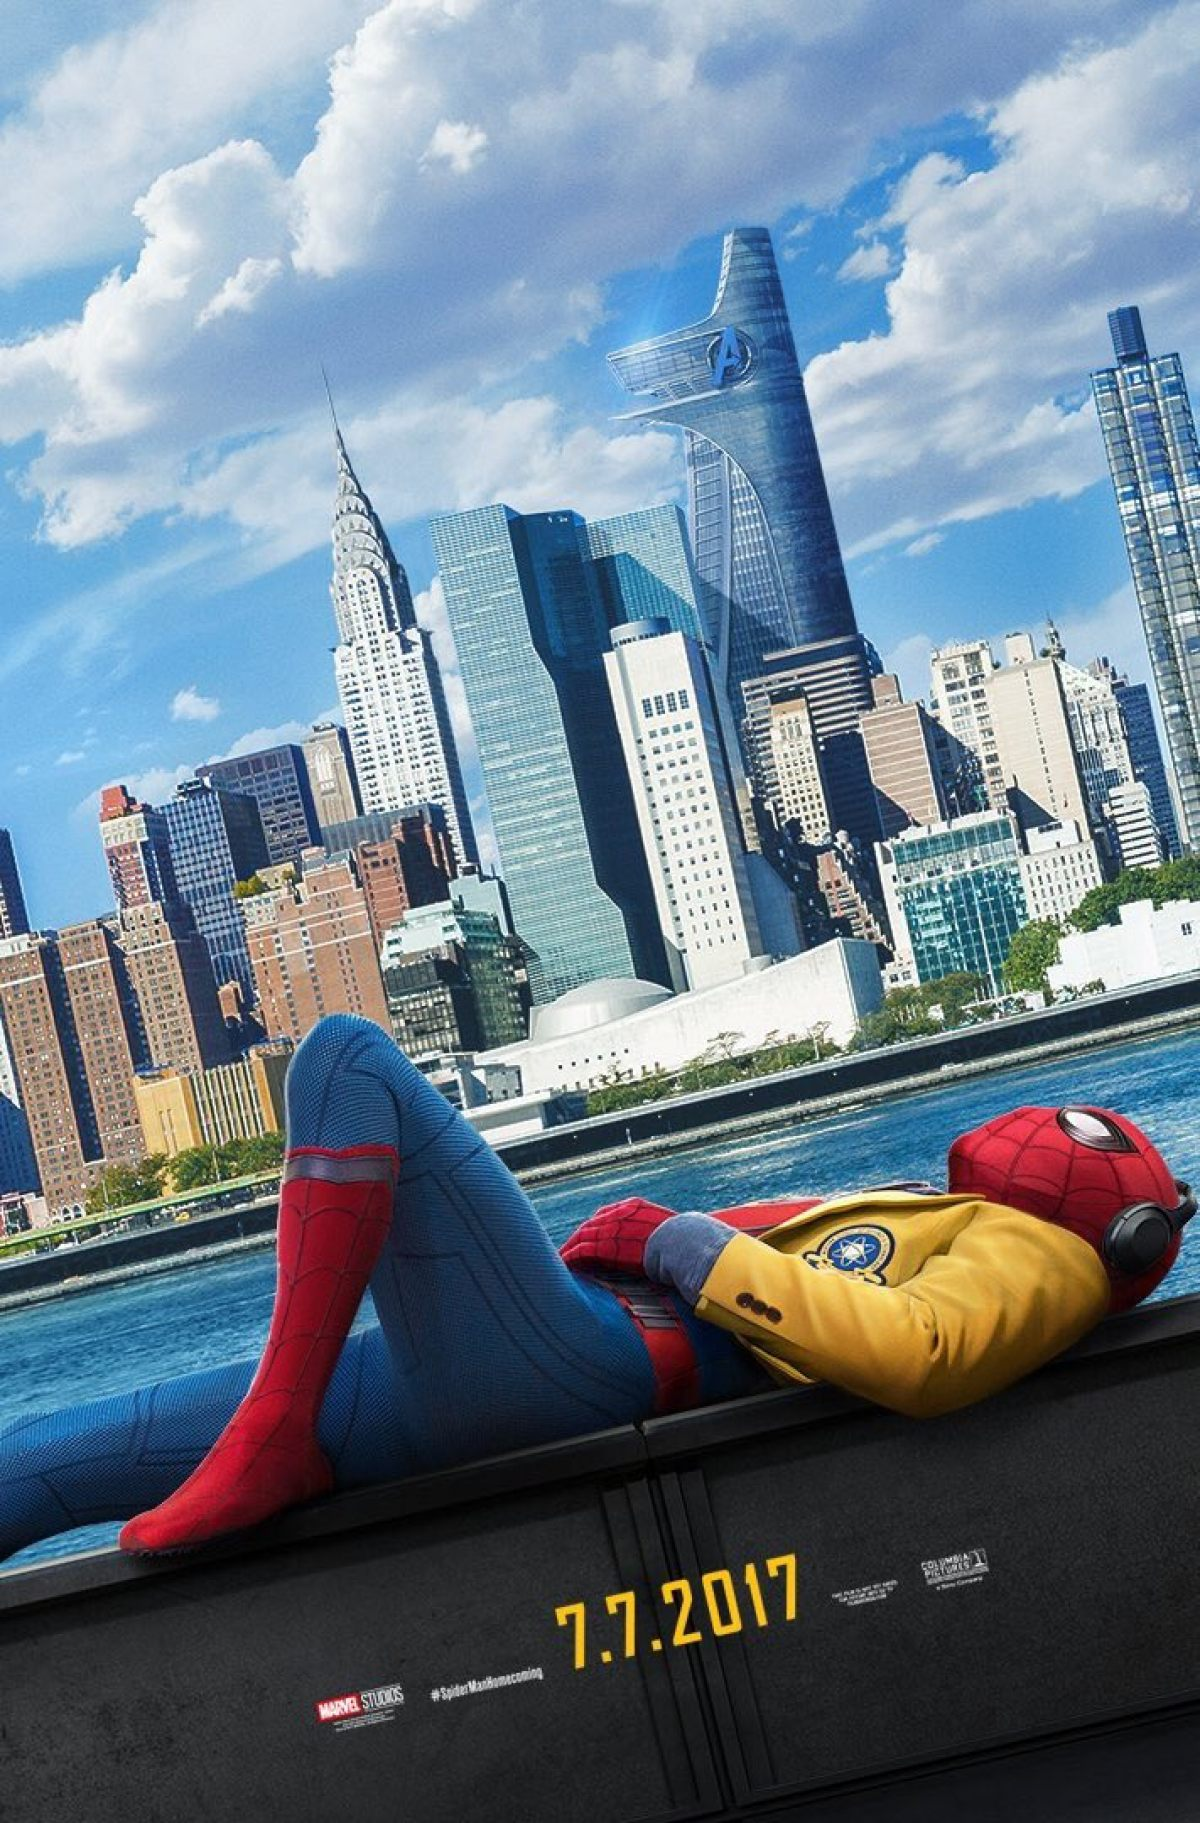 Marvel hits the mark with ‘Spider-Man: Homecoming’